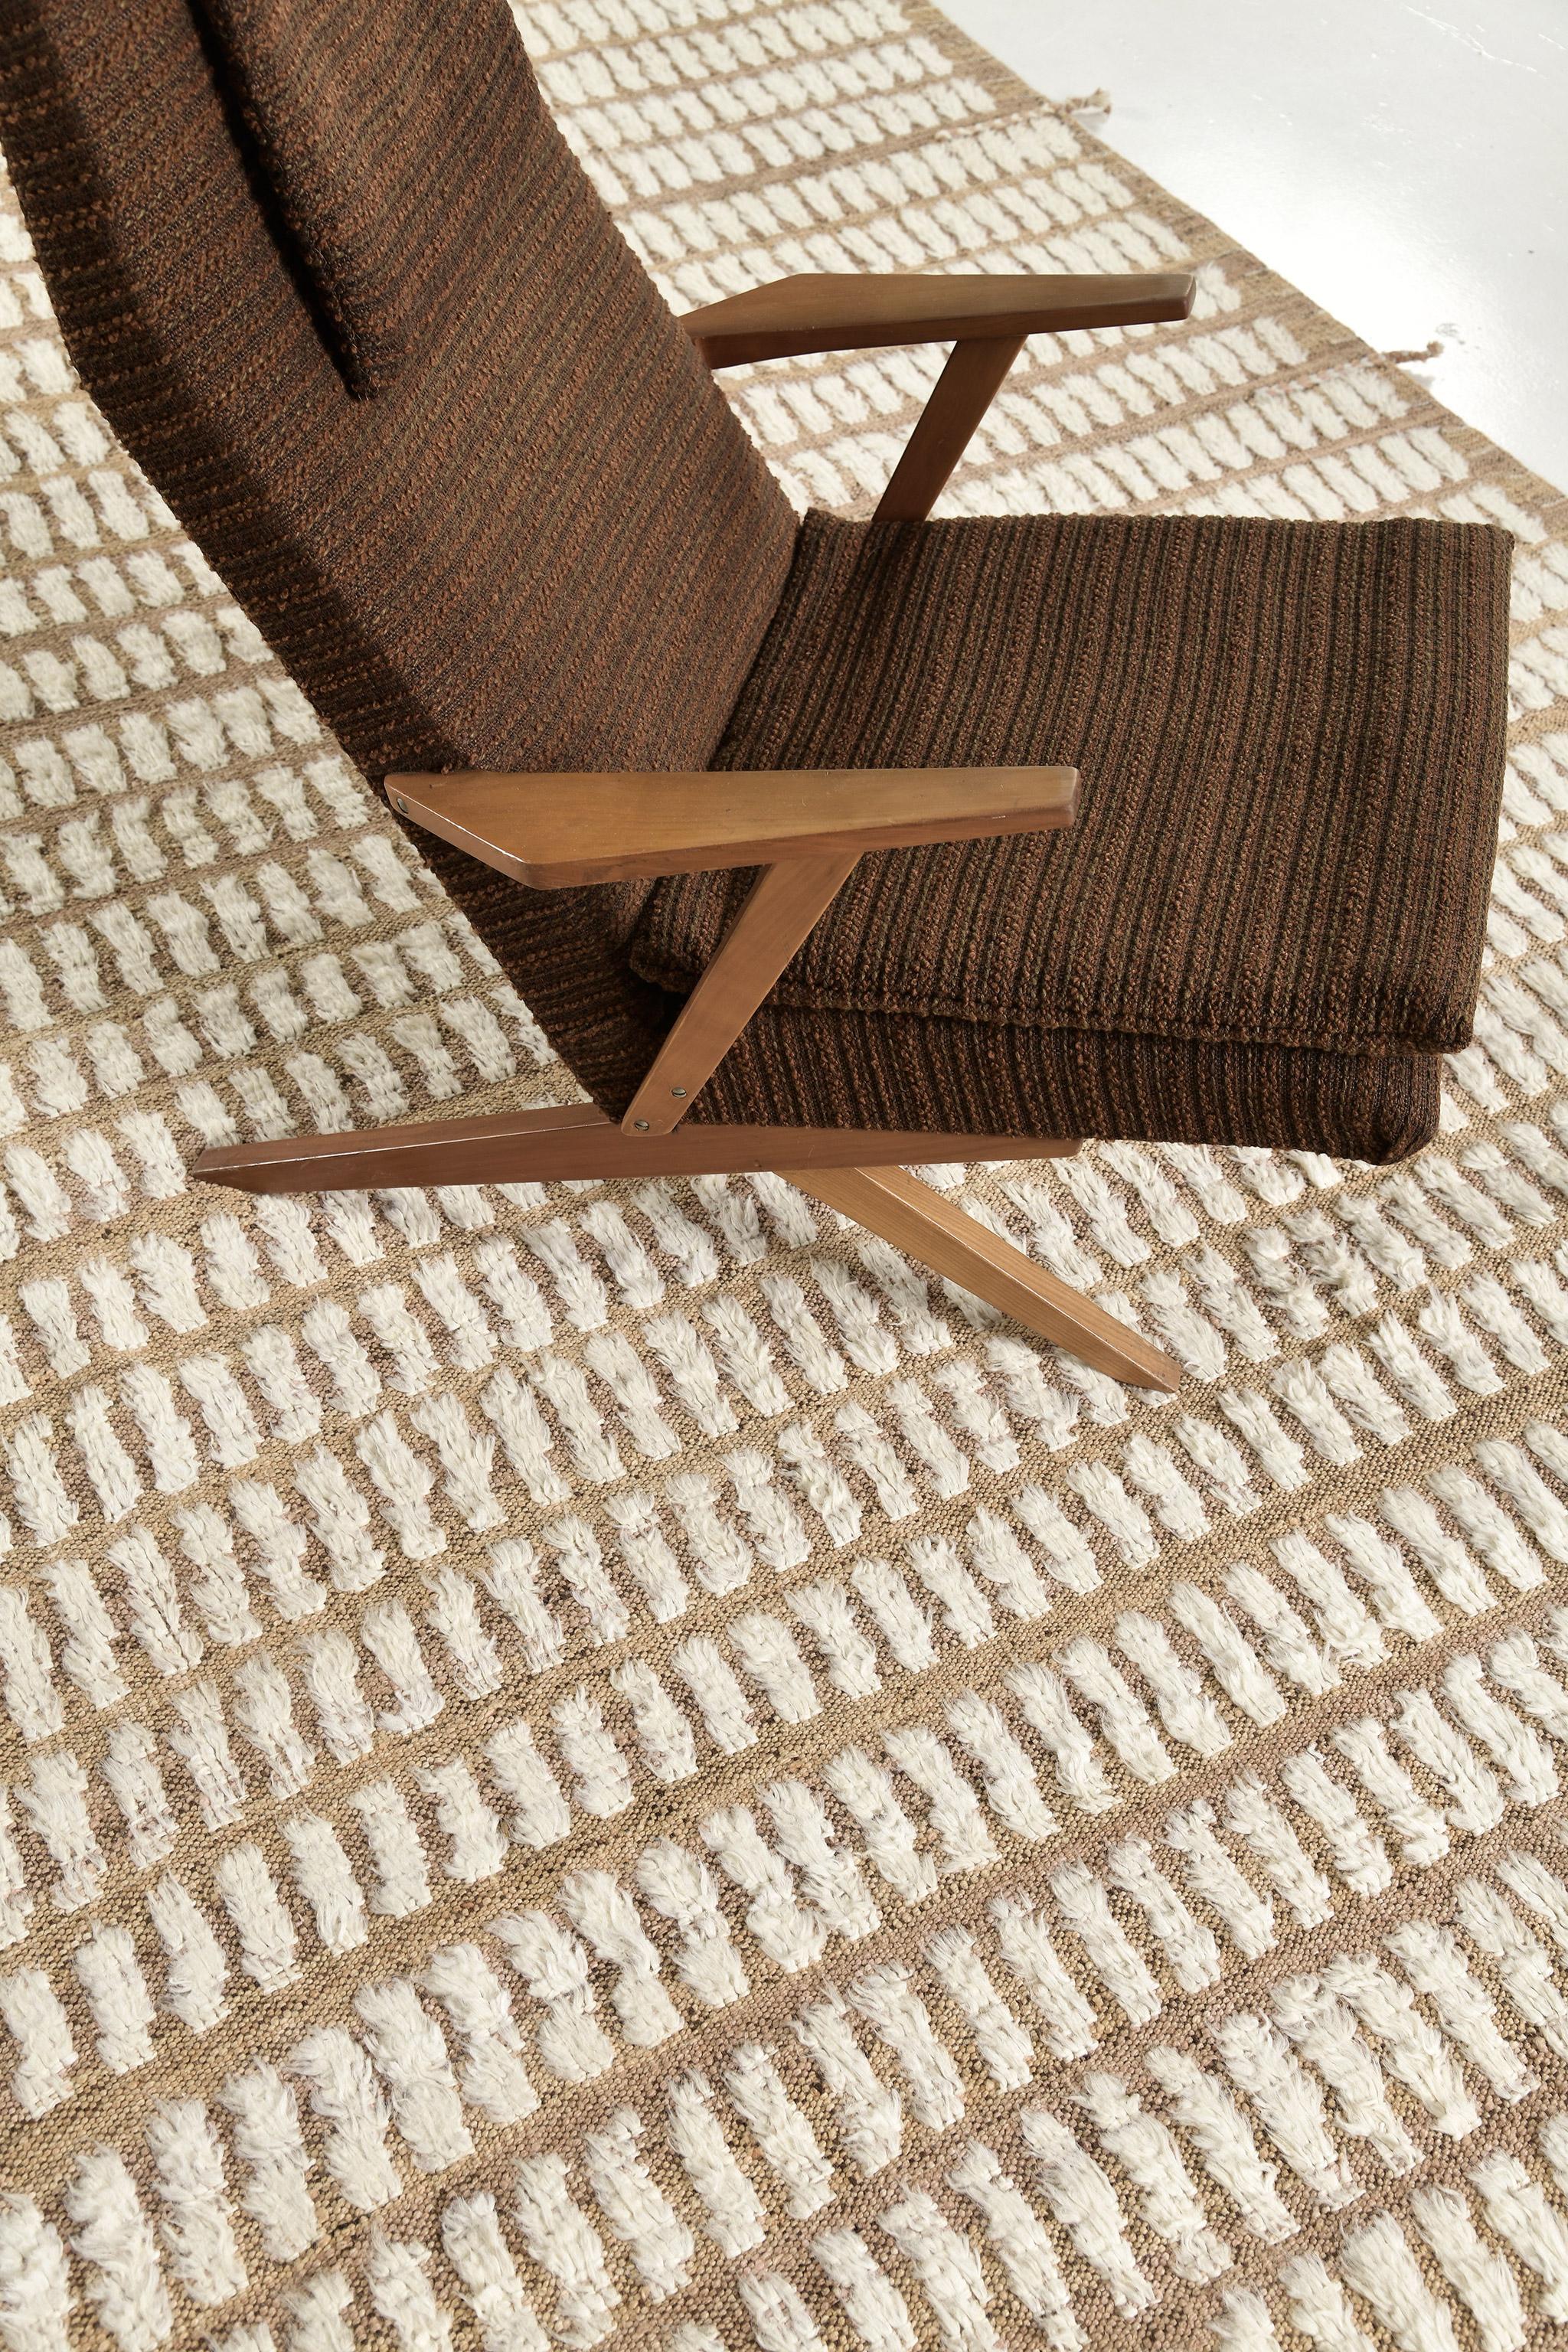 Barguzin is a handwoven impressive wool rug with timeless embossed patch detailing. In addition to its perfect neutral-toned pile weave, Barguzin has an elegant shag that nourishes a lustrous texture and contemporary feel to one's space. The Haute